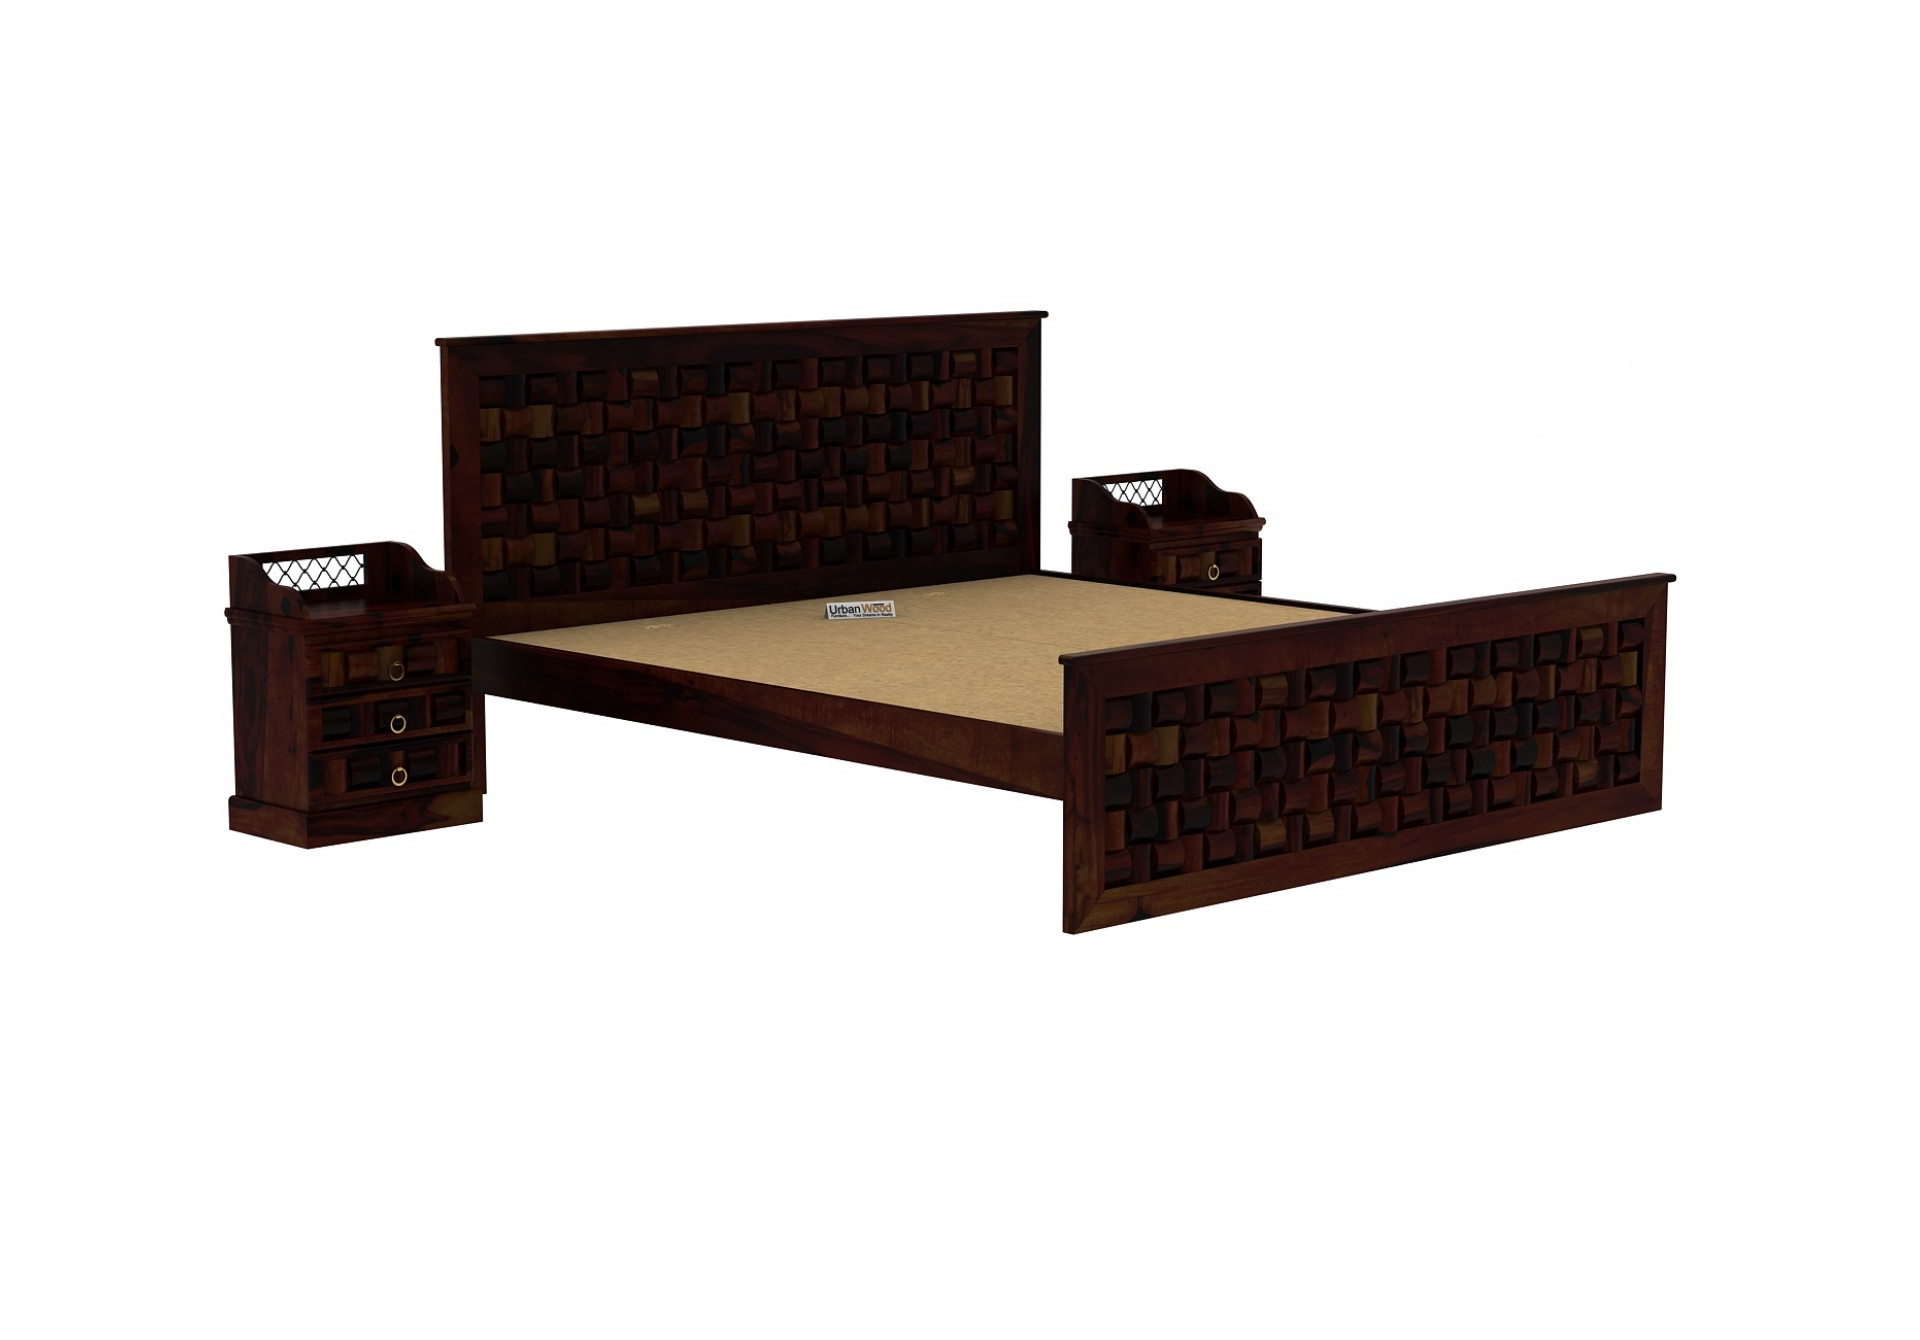 Hover Bed Without Storage ( King Size, Walnut Finish )